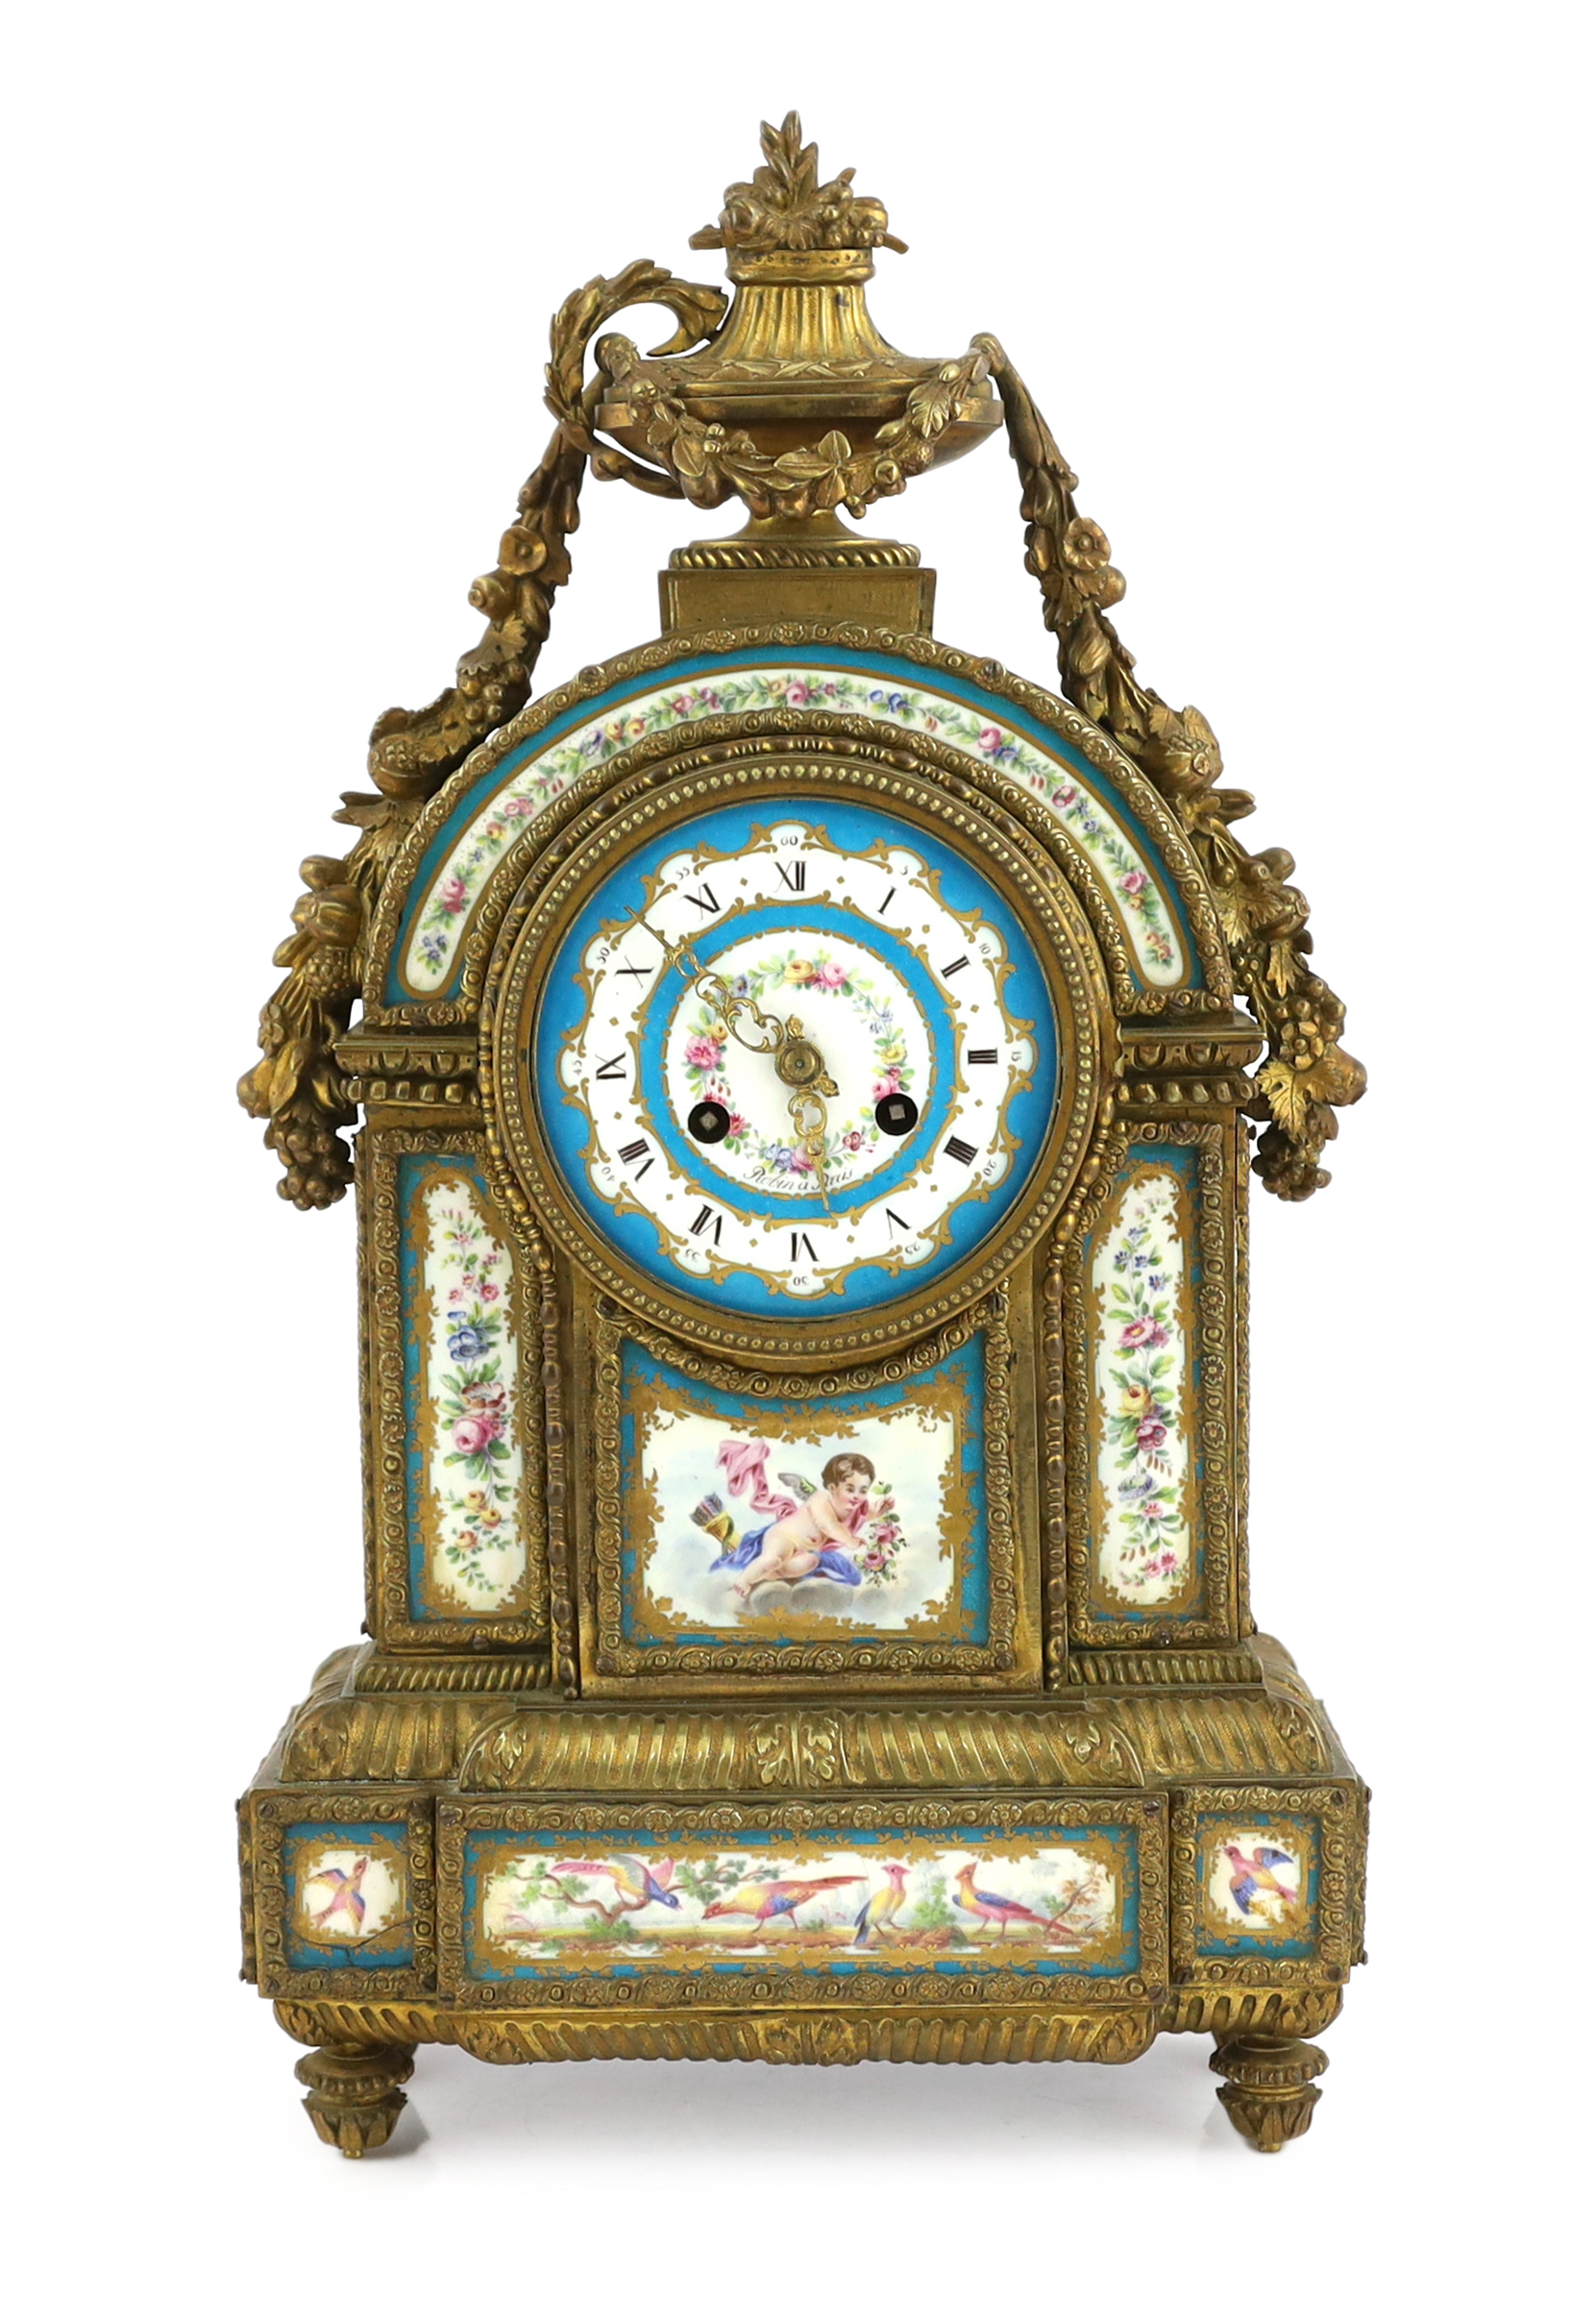 Robin à Paris, a 19th century French ormolu and Sevres style porcelain mantel clock